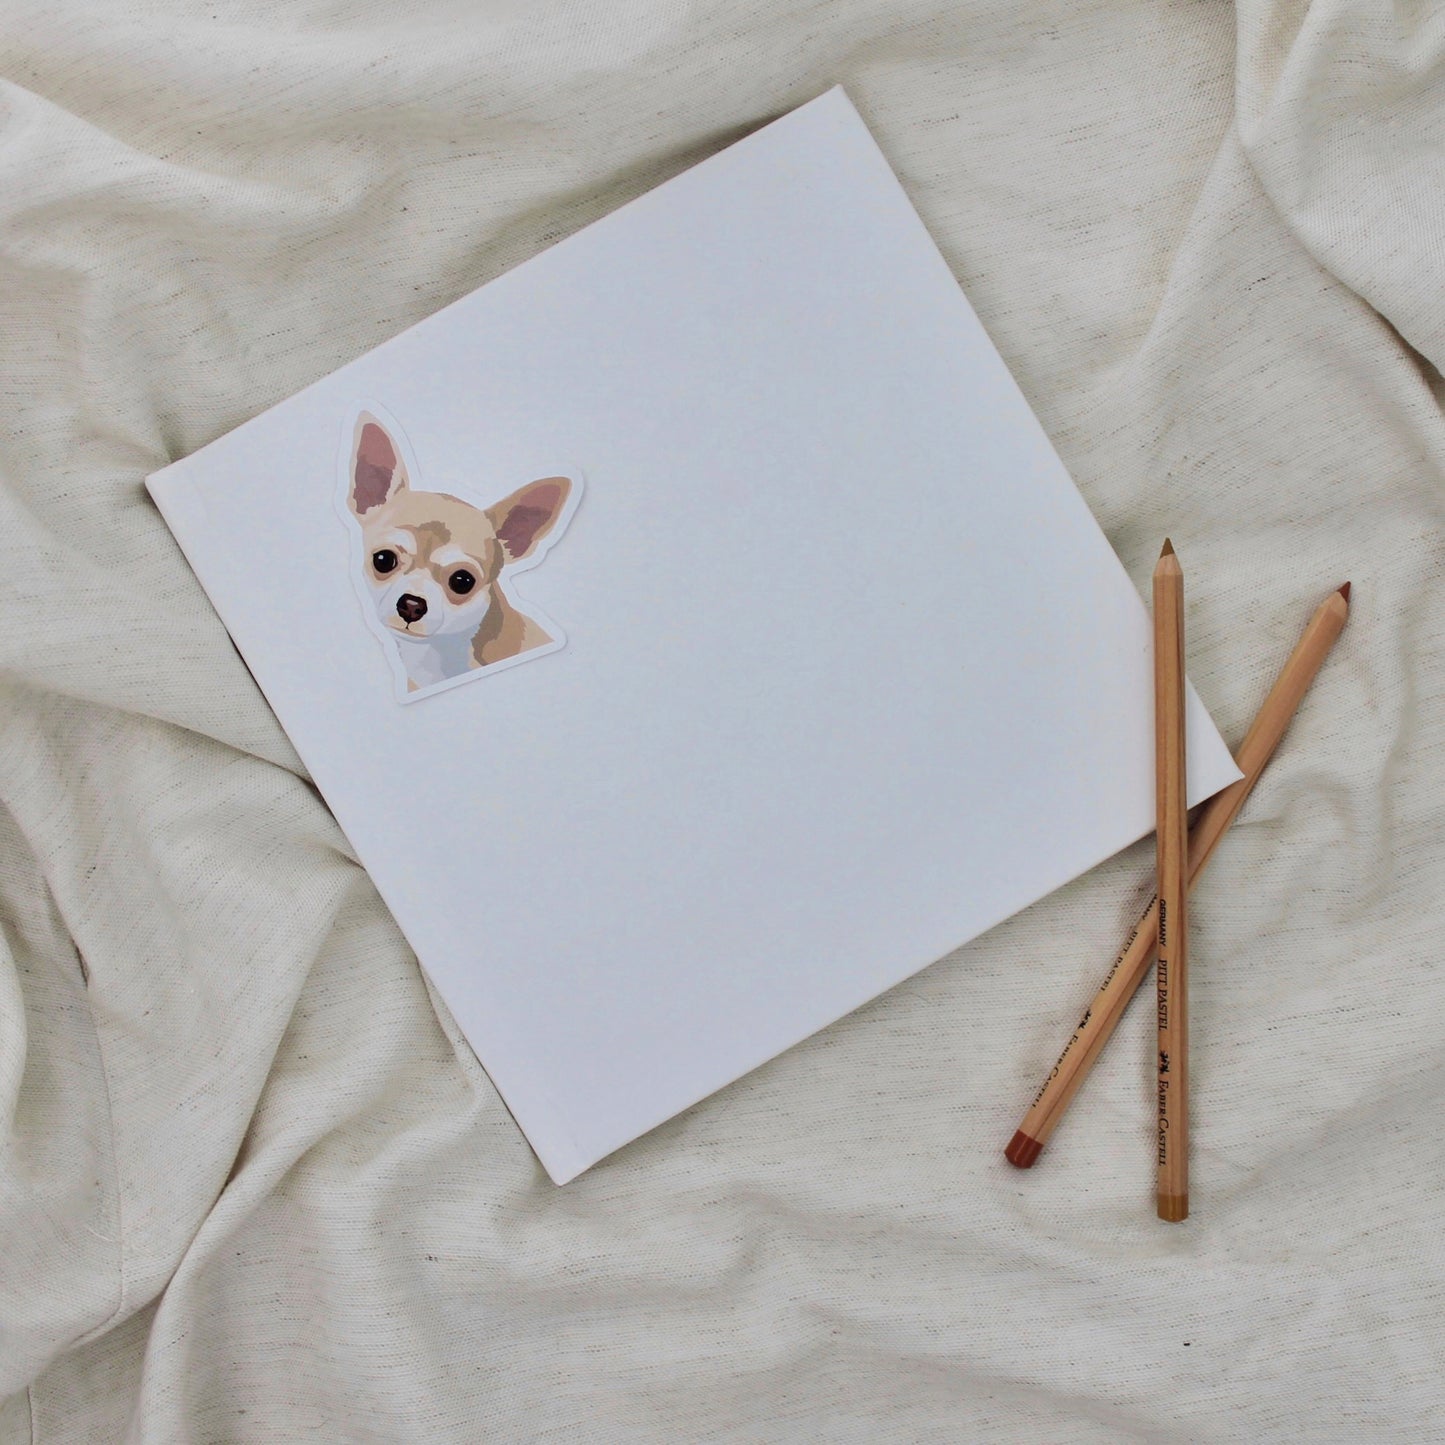 Chihuahua sticker on notebook